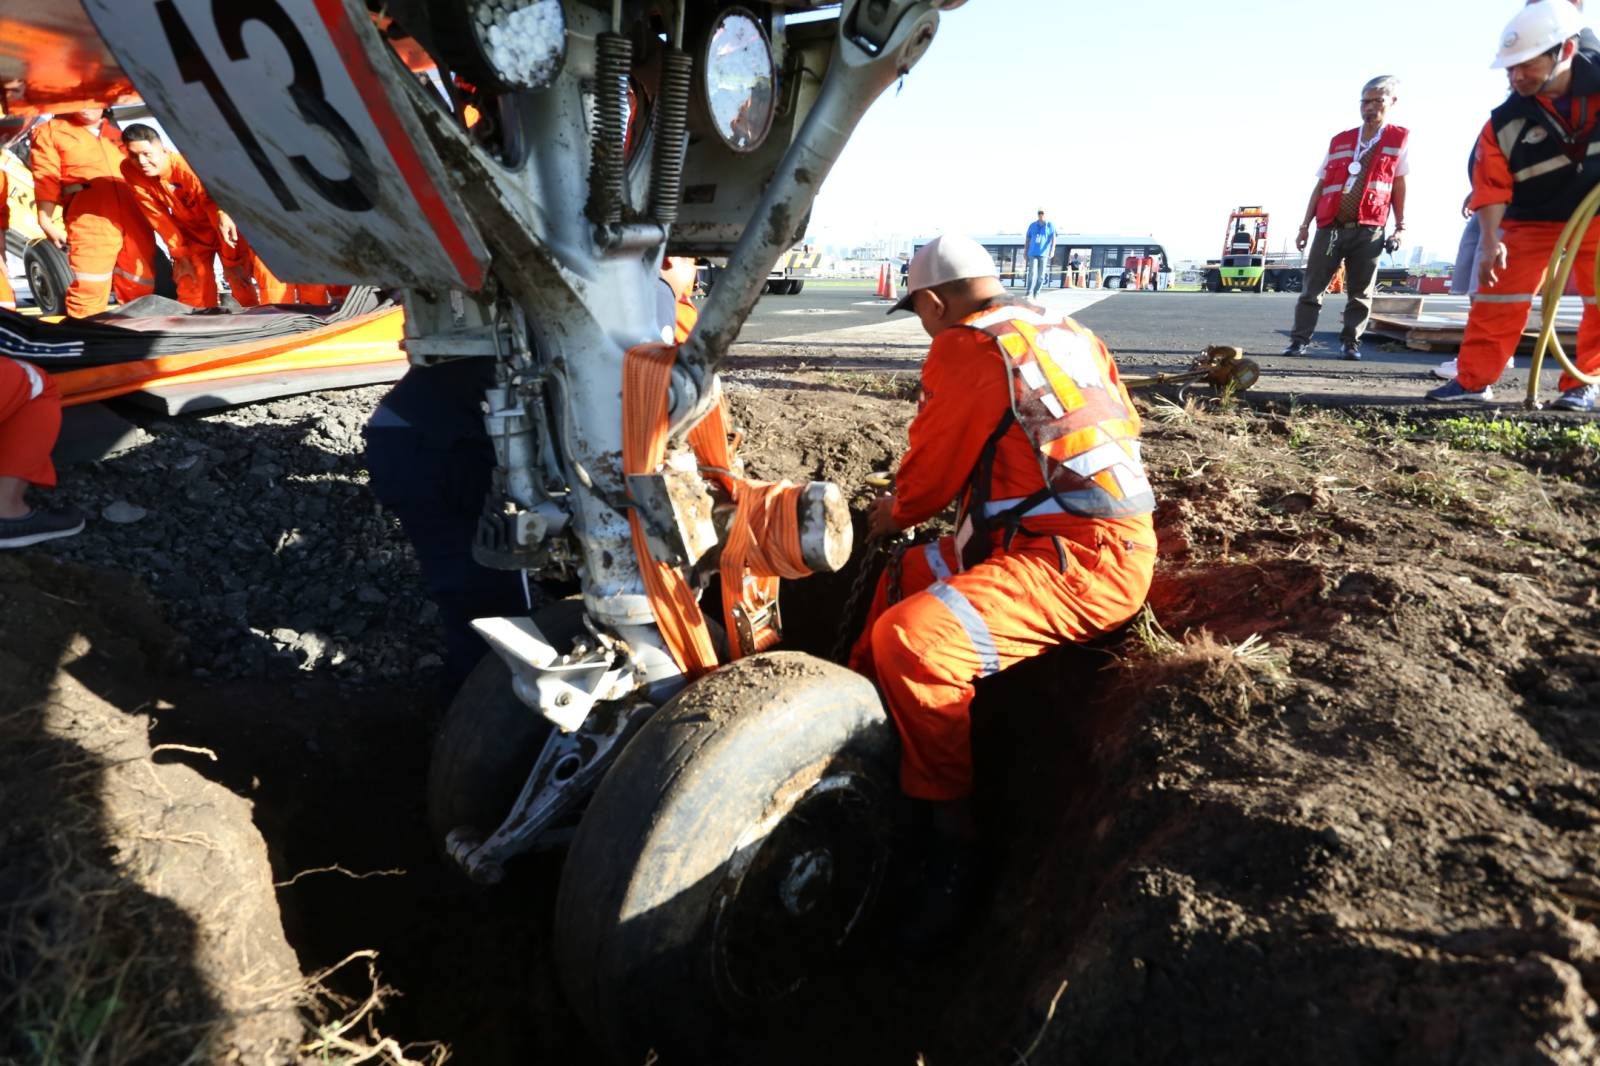 DIG. Airport authorities dig out the nose wheel that got stuck in the grassy area of Raunway 13/31. Photo courtesy of the MIAA 